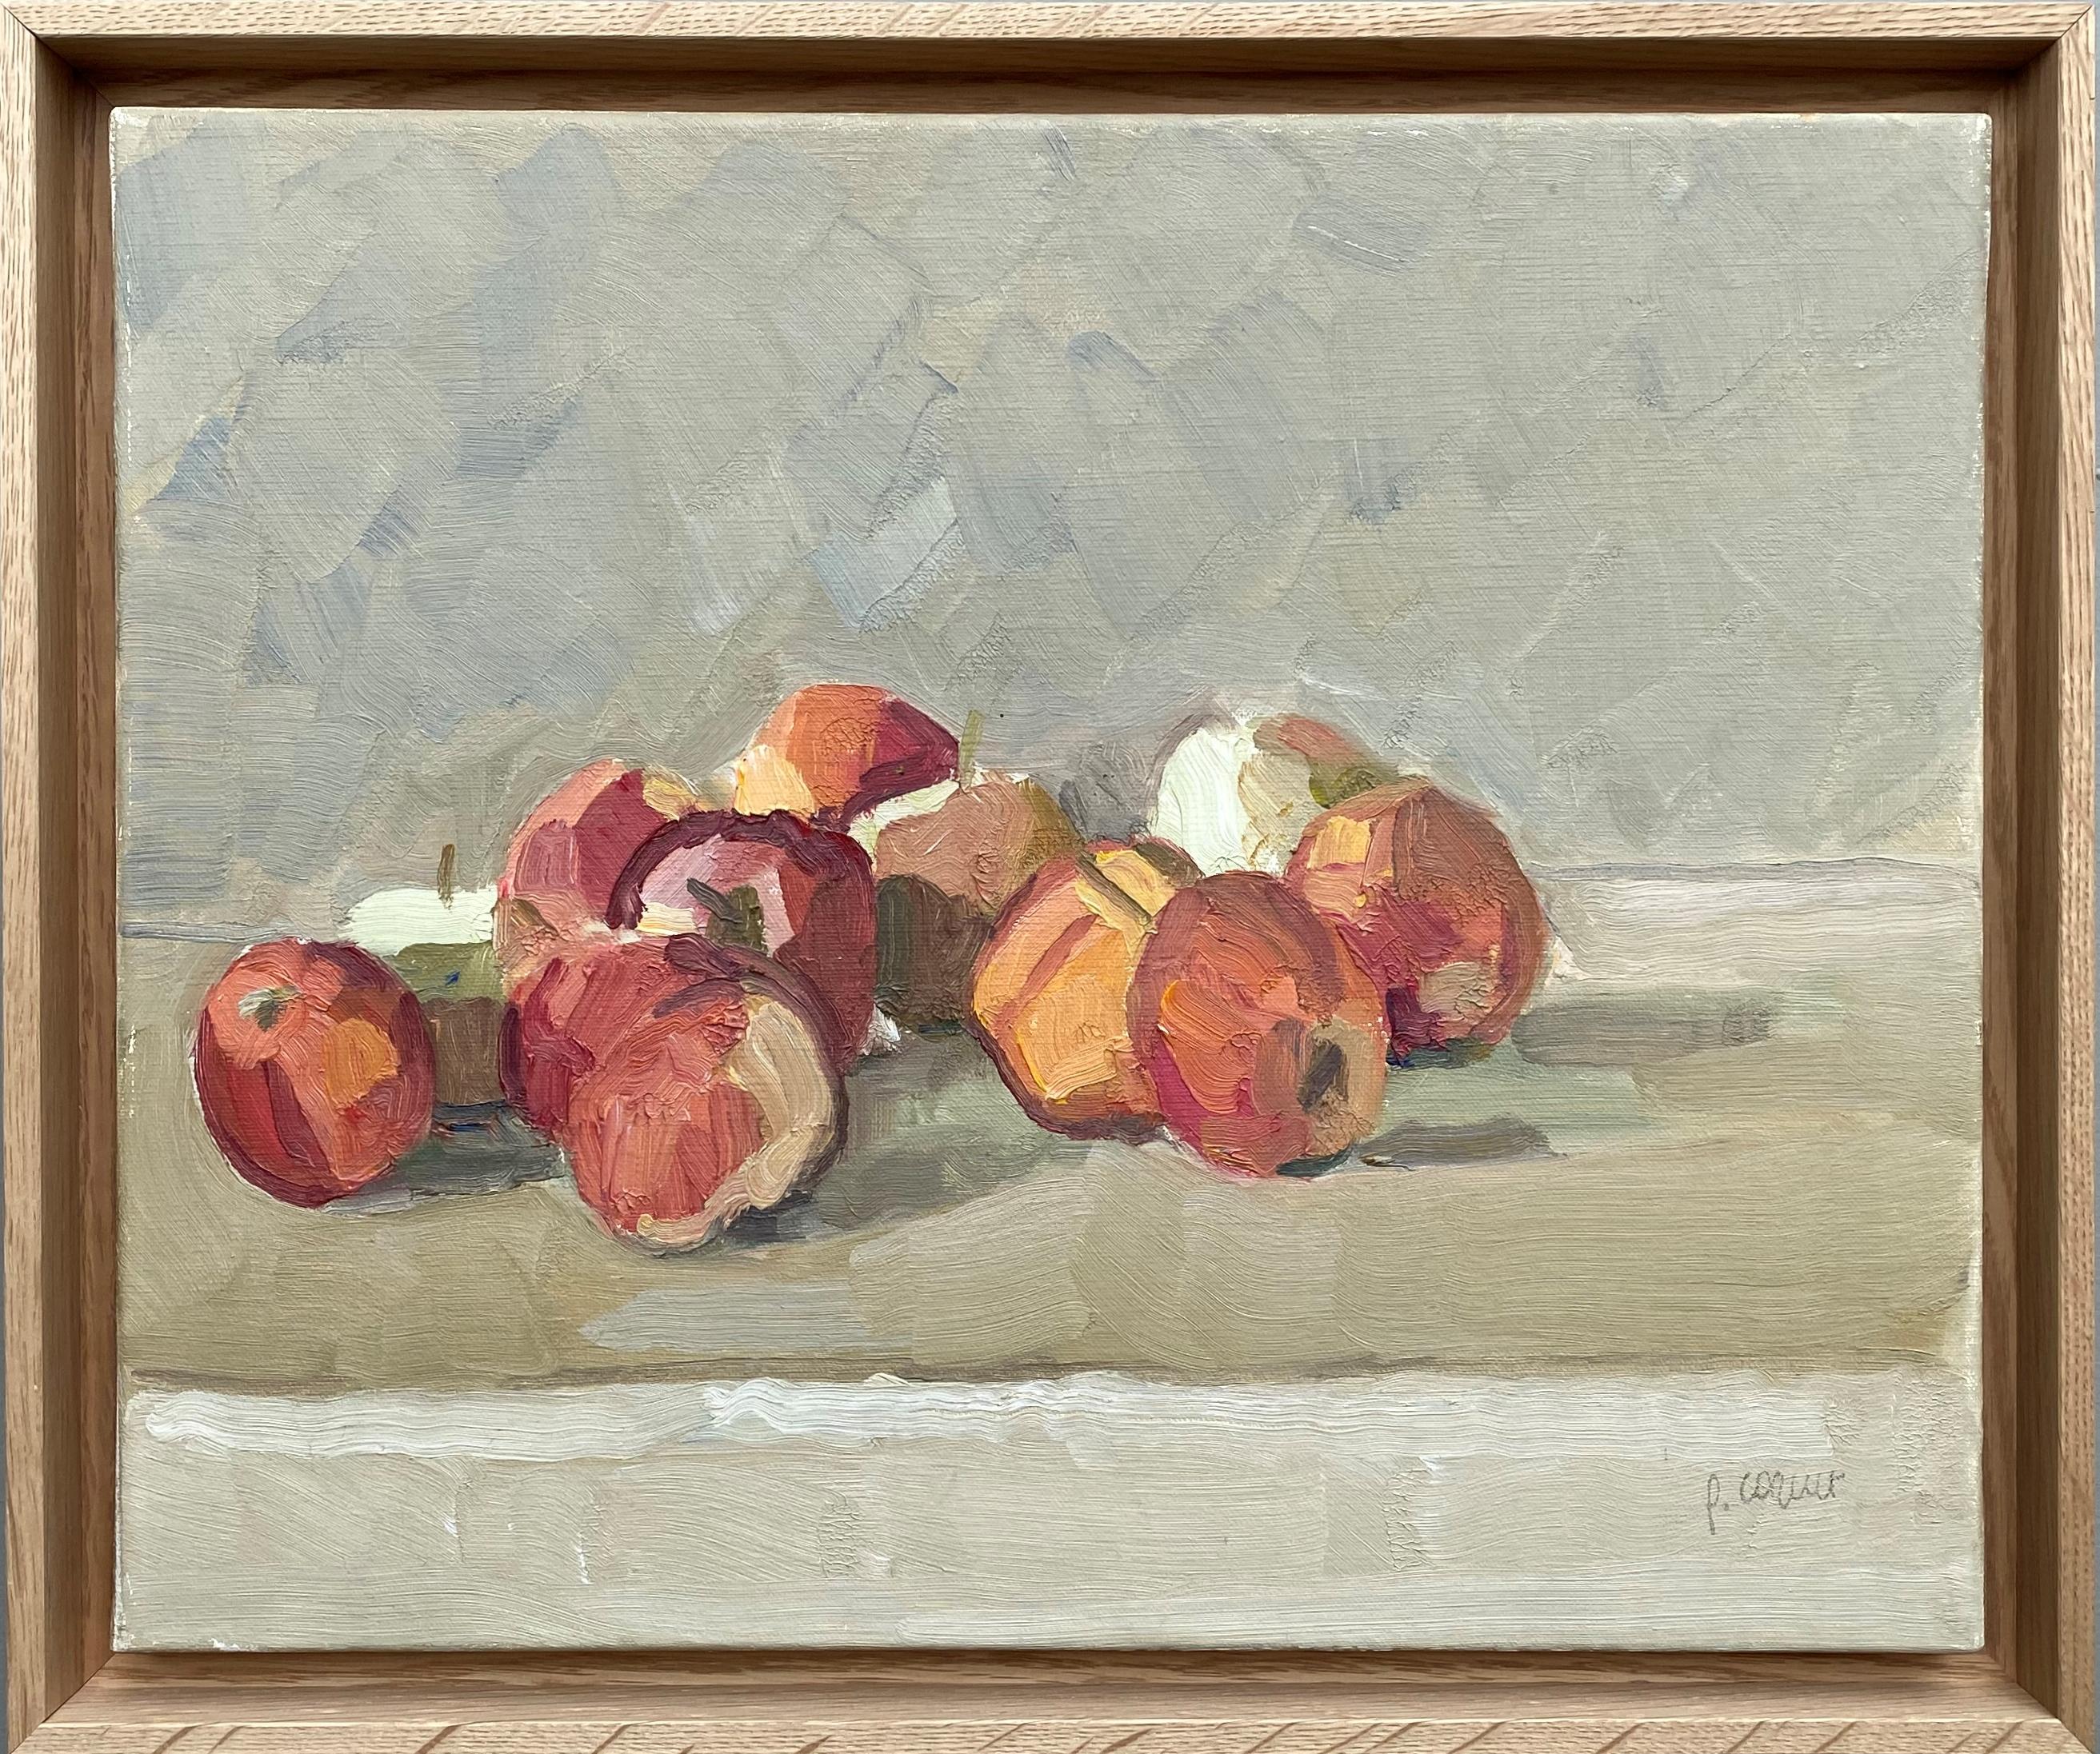 Les pommes/The apples - Painting by Pierre Coquet